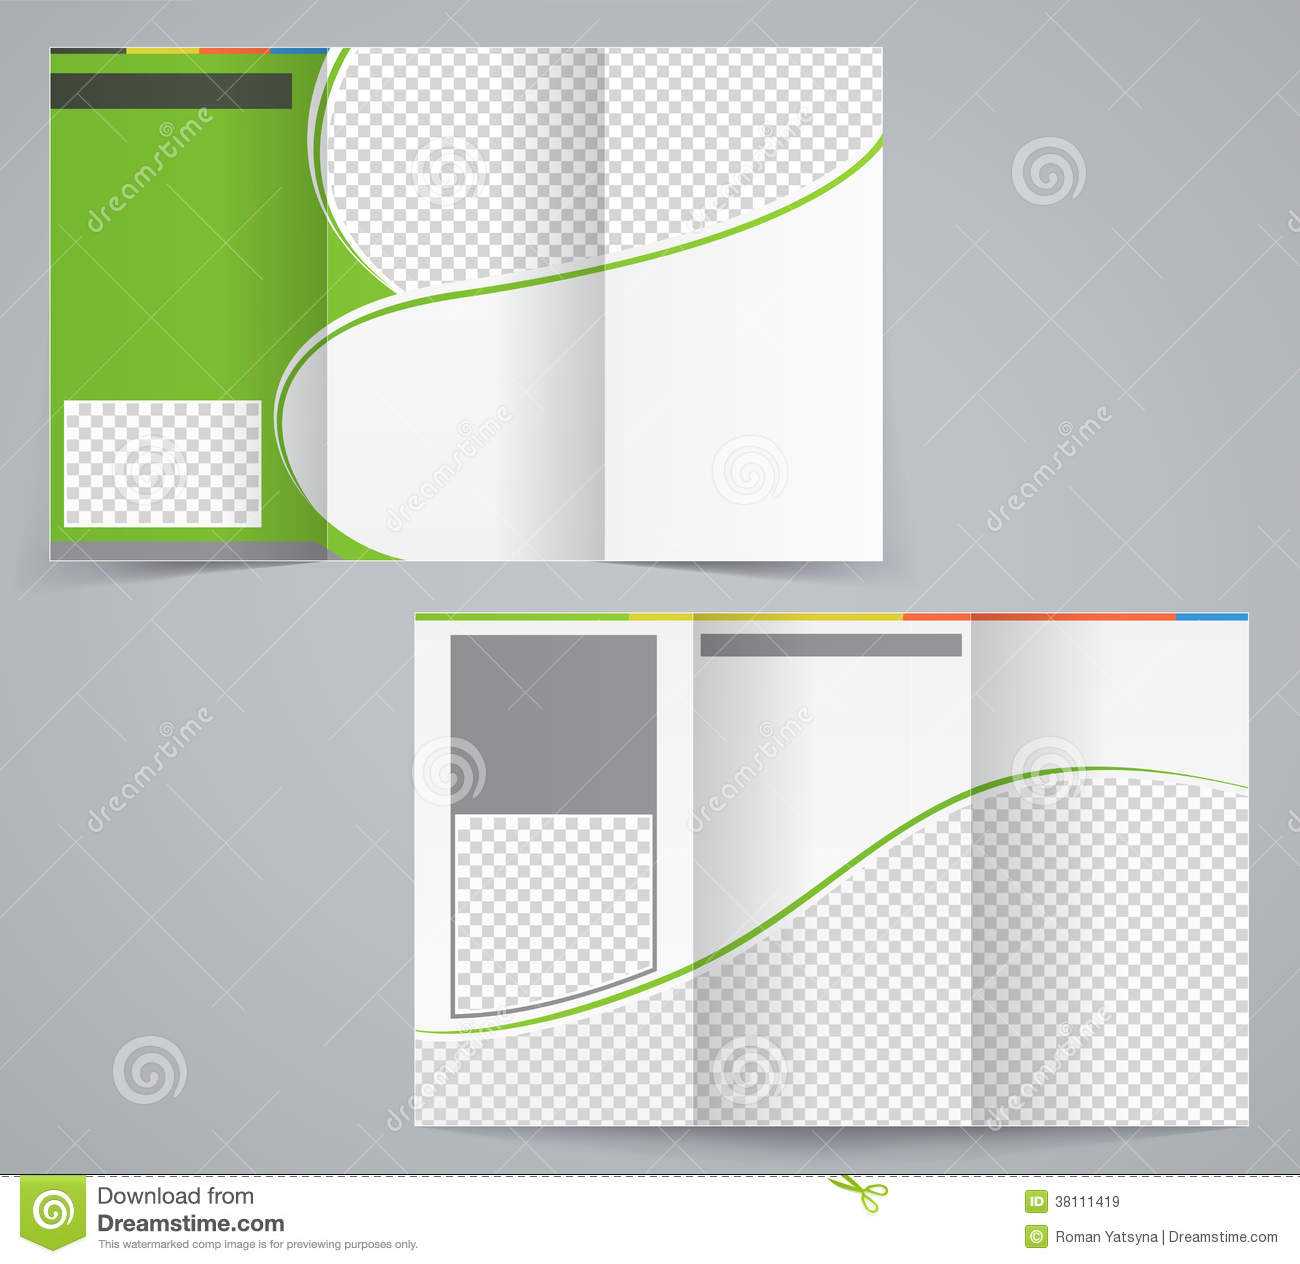 Tri Fold Business Brochure Template, Vector Green Stock With Free Illustrator Brochure Templates Download